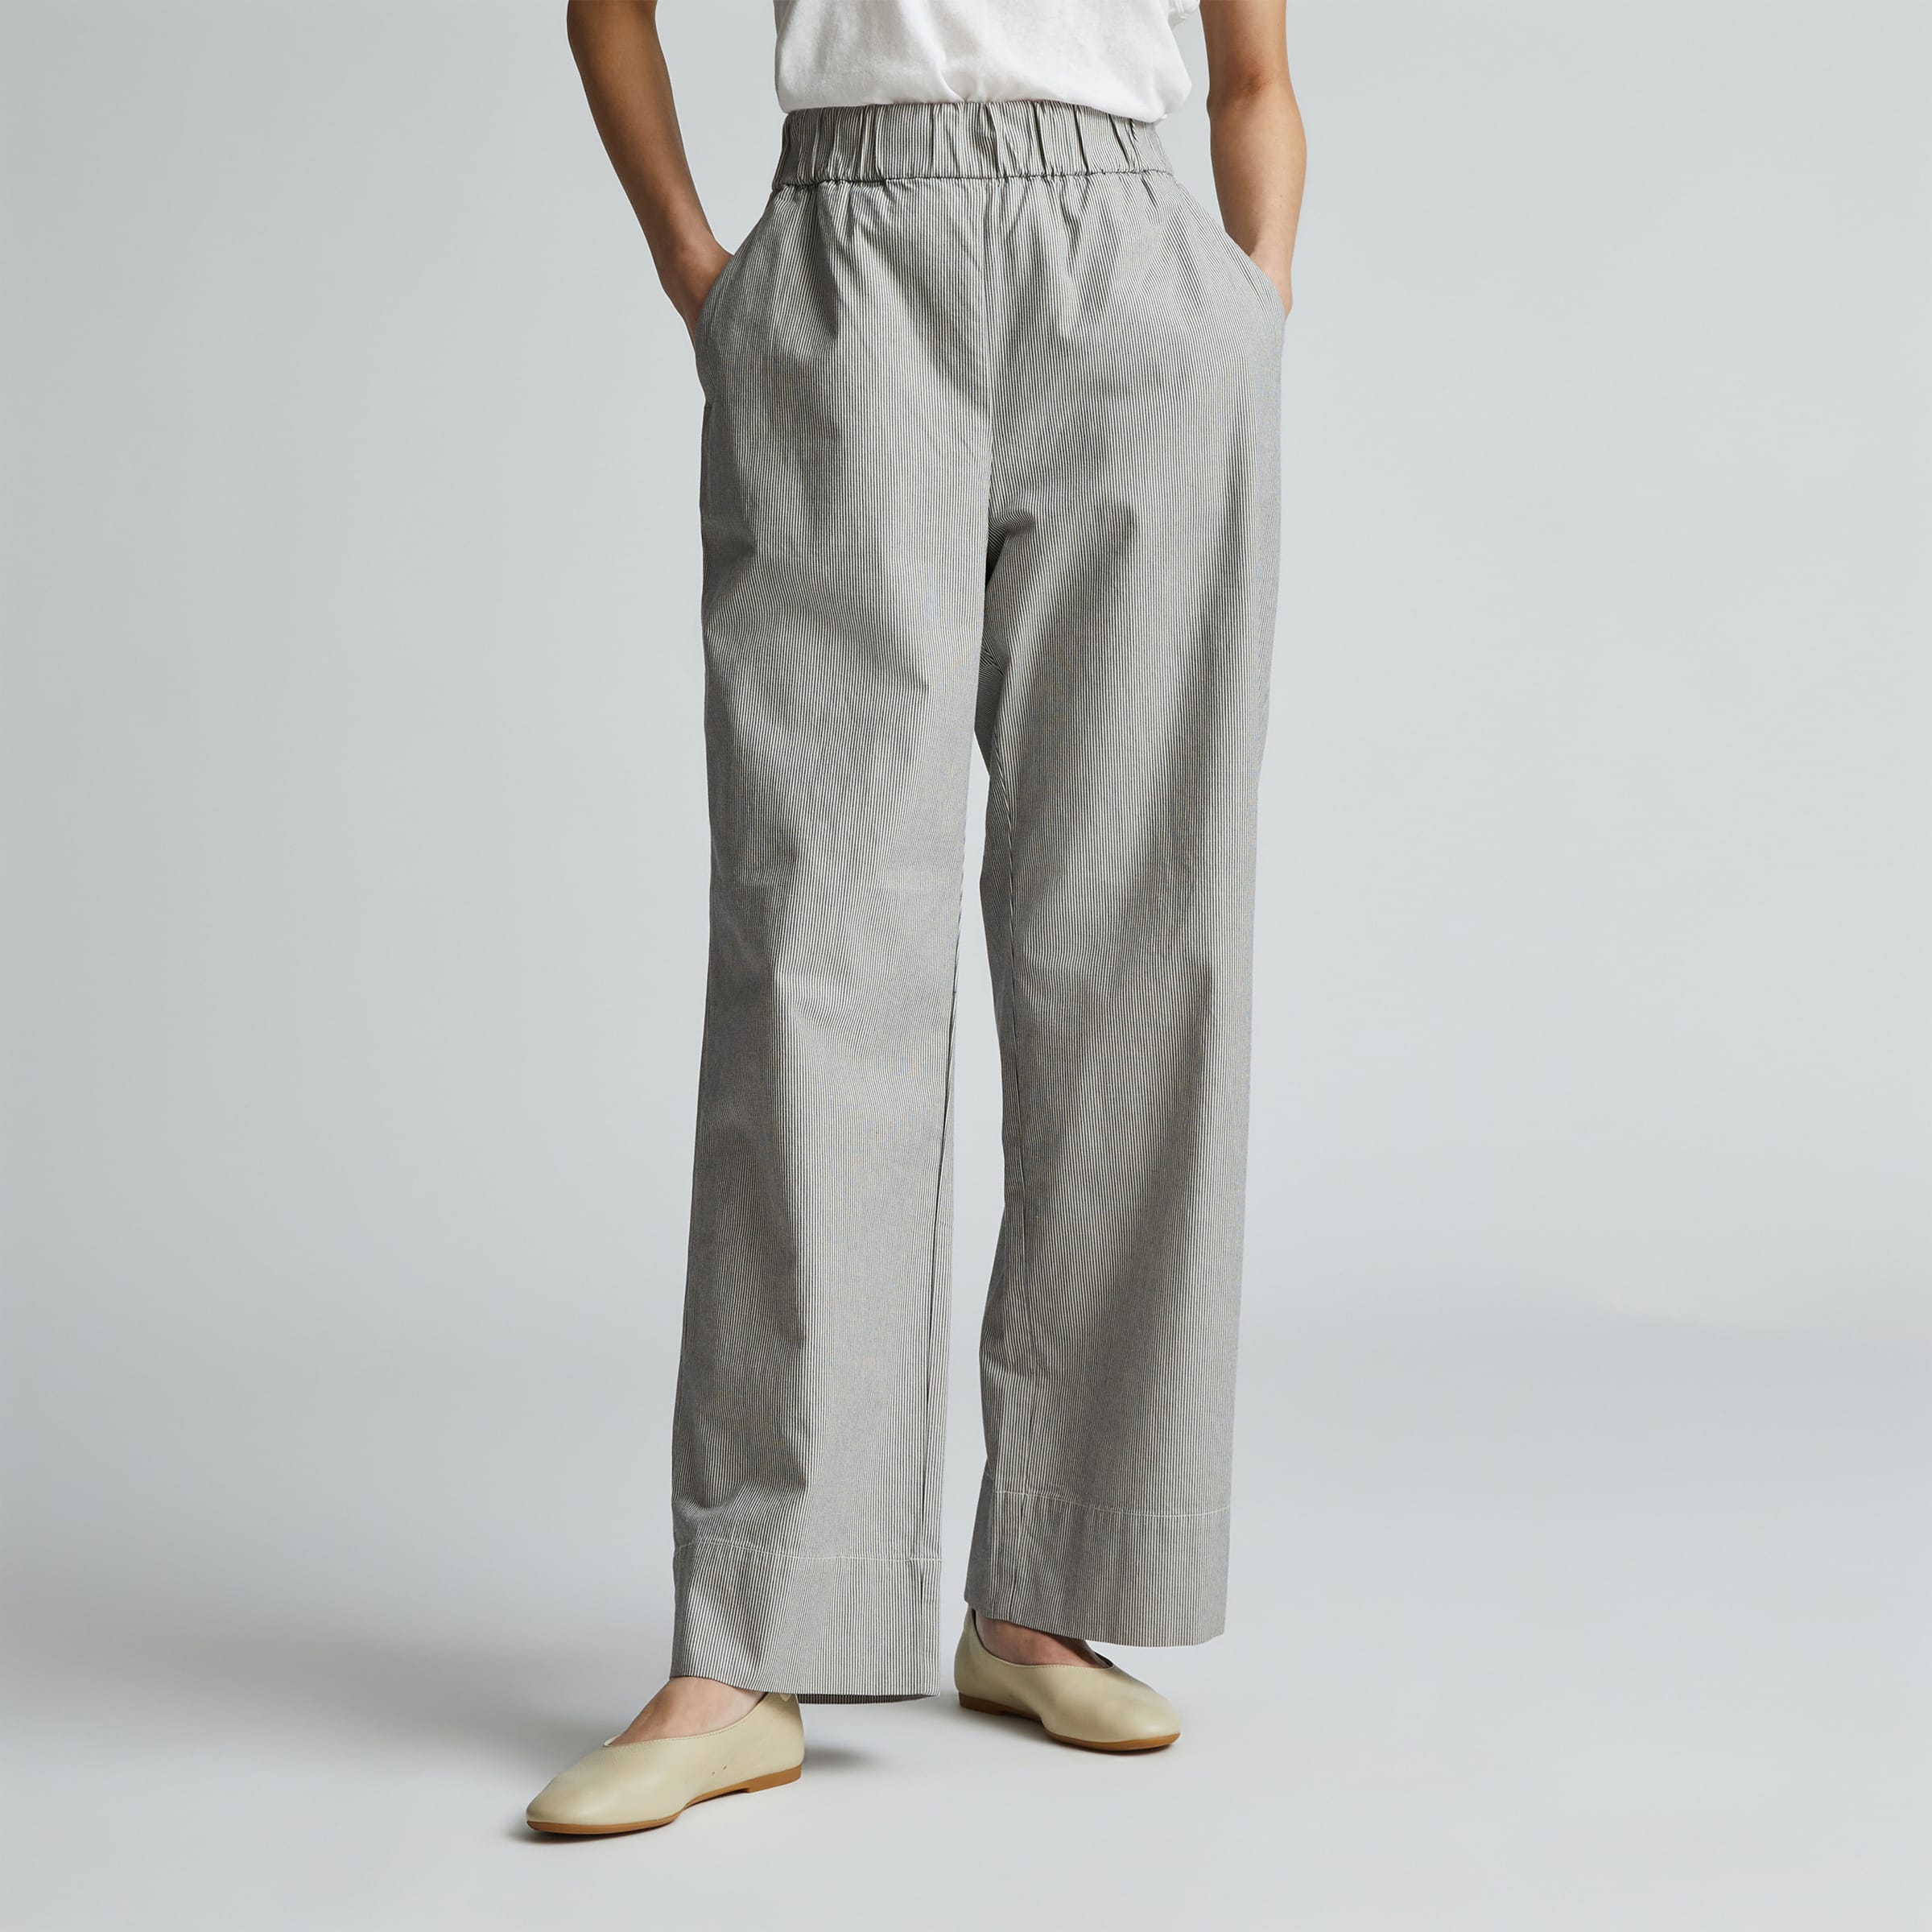 The Easy Pant Canvas Tan / Navy – Everlane